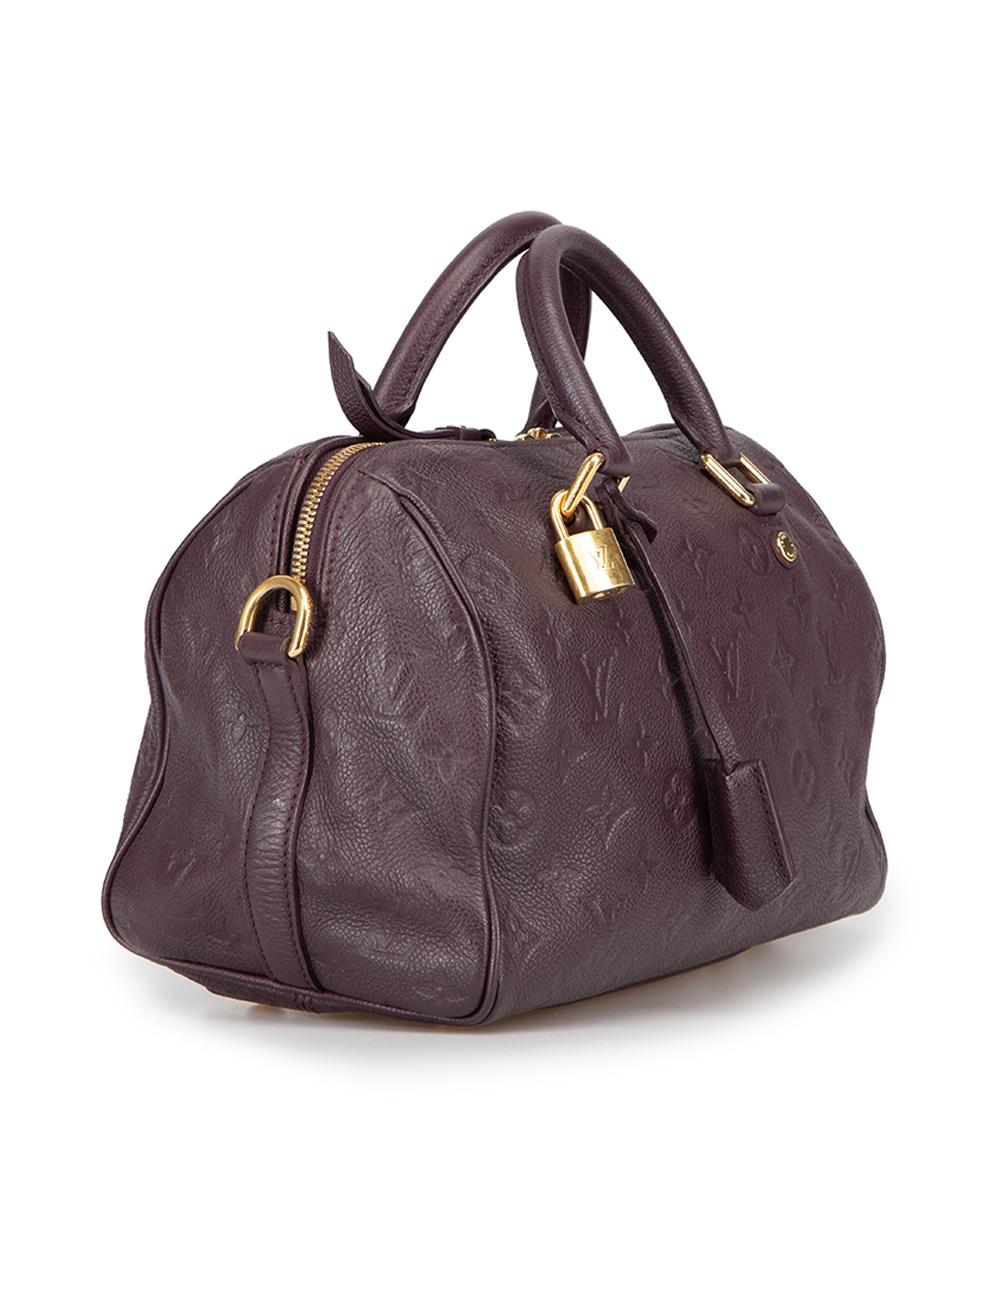 CONDITION is Very good. Minimal wear to bag is evident. Minimal wear to the lining due to paint marks on this used Louis Vuitton designer resale item. 



Details


2012

Purple

Leather

Medium top handle bag

2x Rolled top handle

1x Detachable